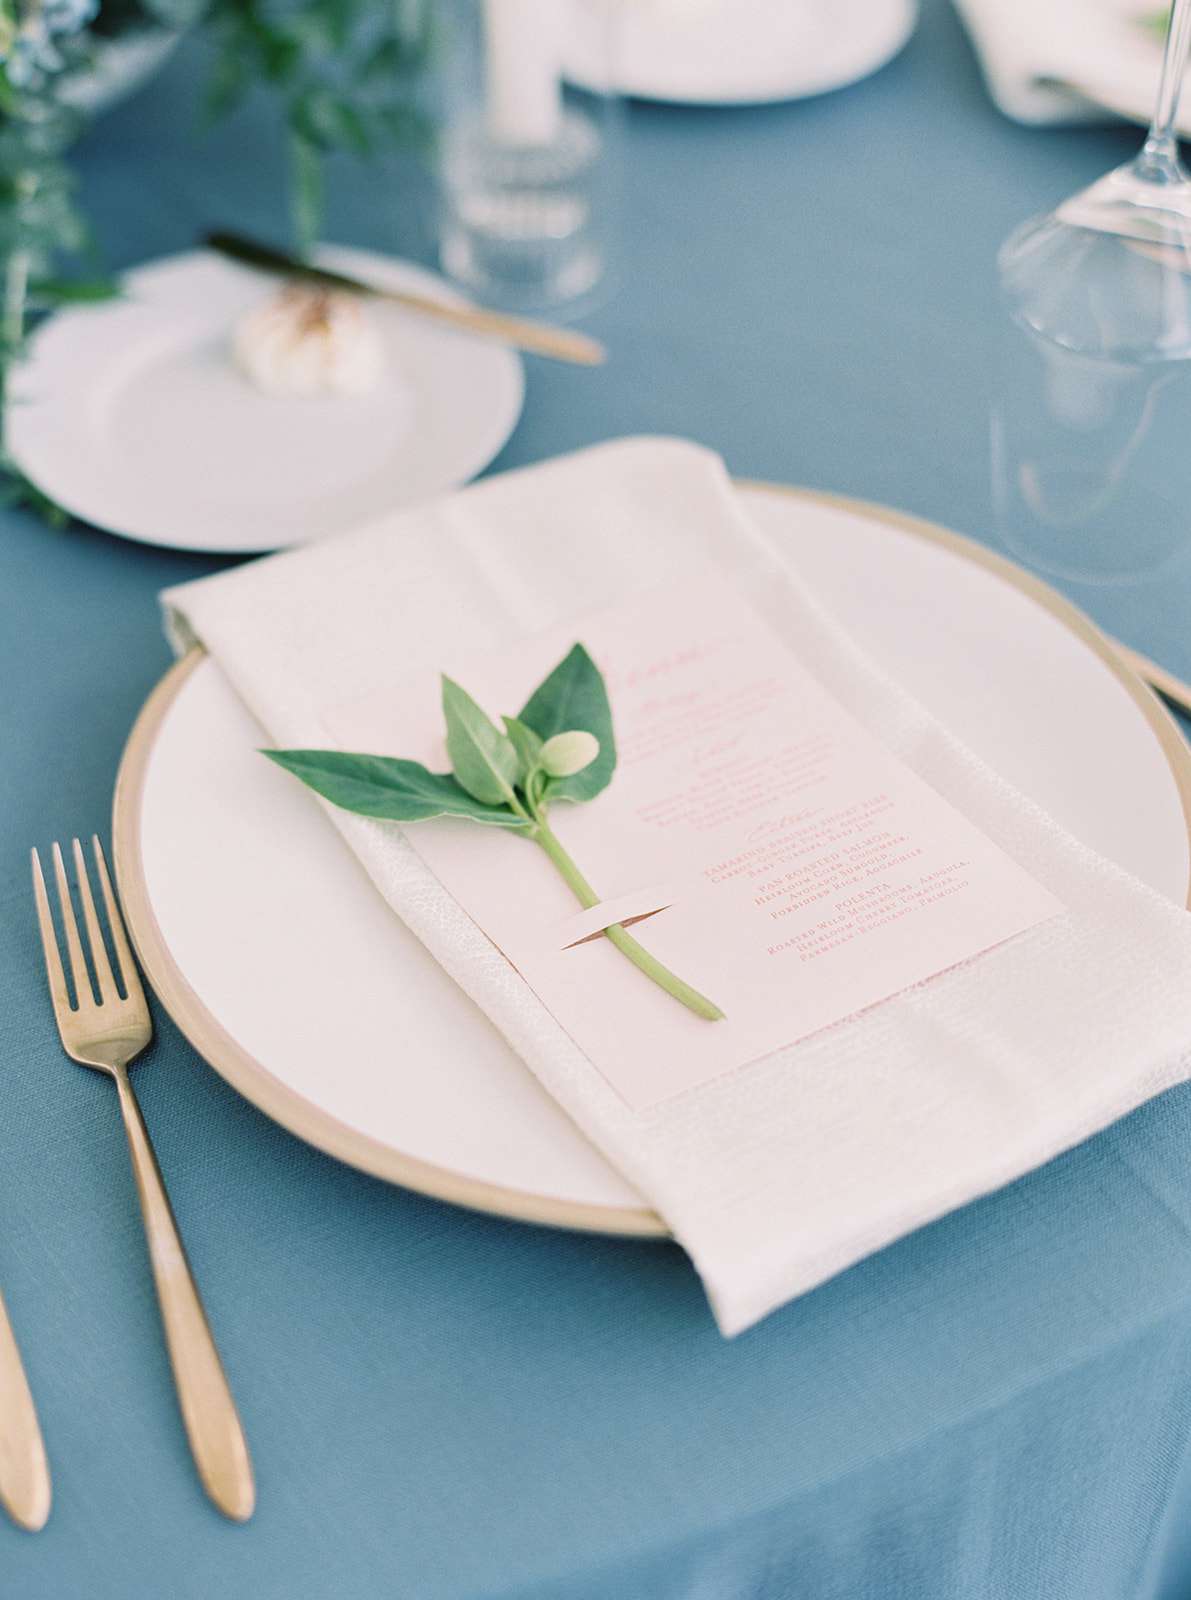 beige toned wedding reception place settings on blue table cloth